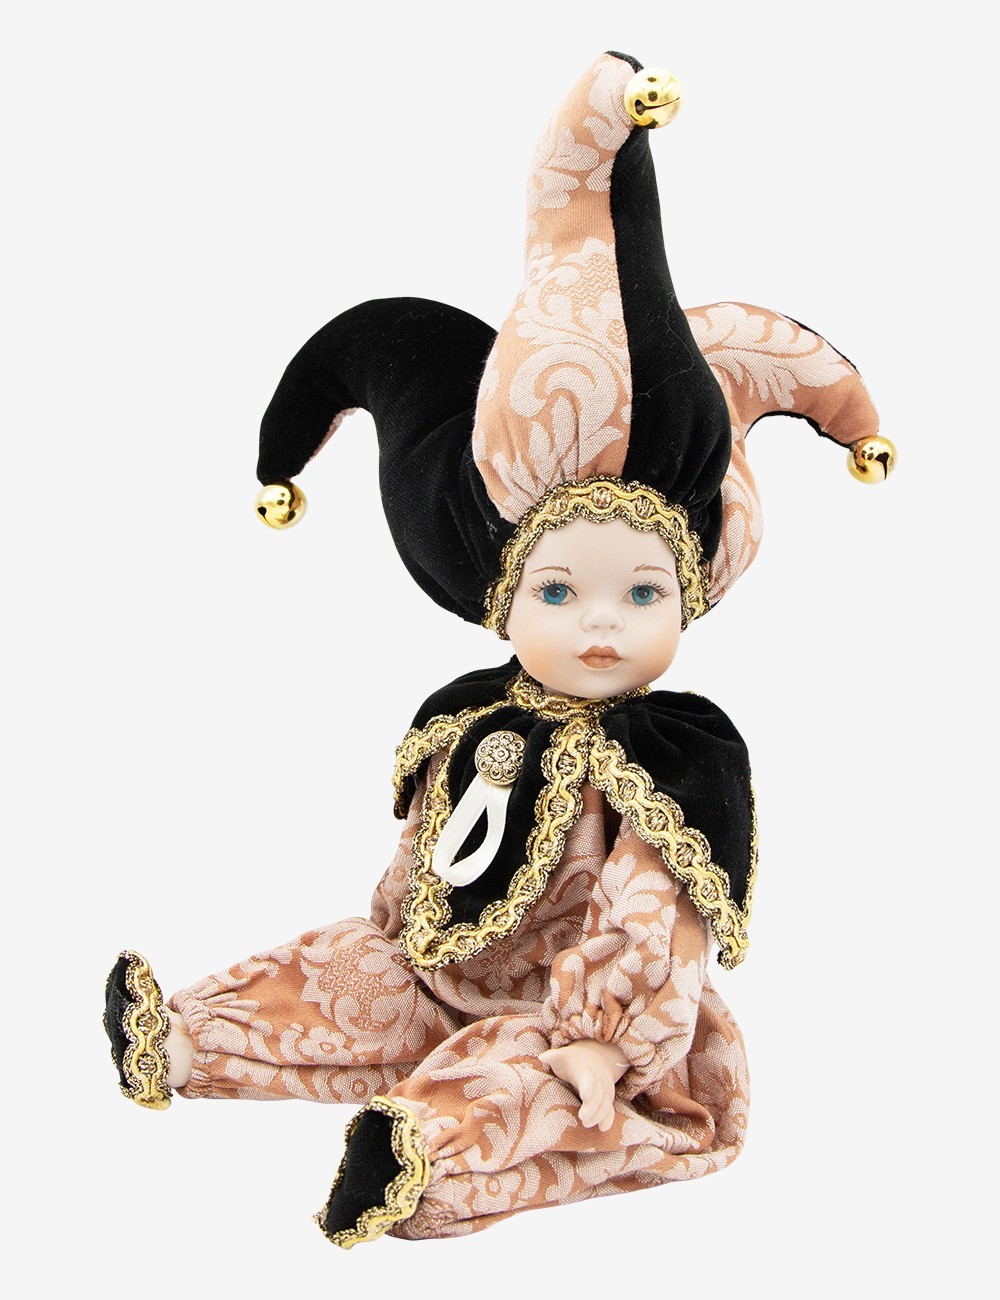 Maxi Triangel 003 - Pink | Doll For Sale Genuine Handcrafted in Italy